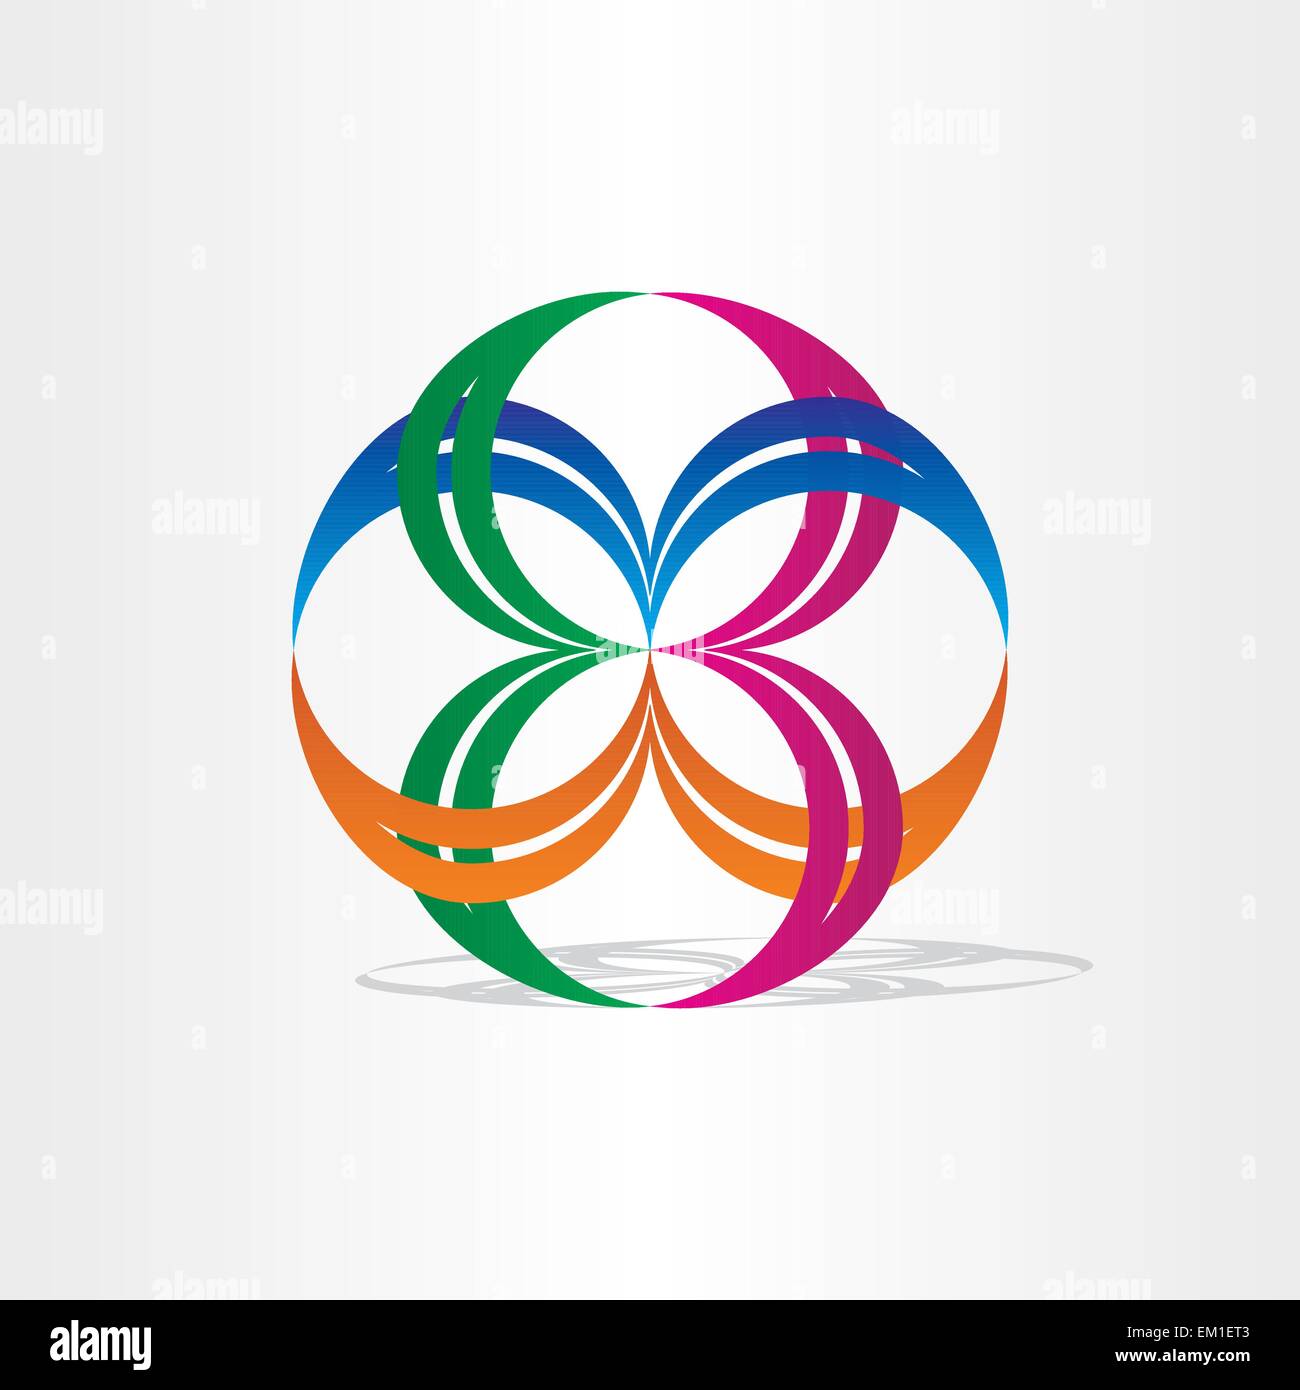 abstract connection icon design network icon element Stock Vector